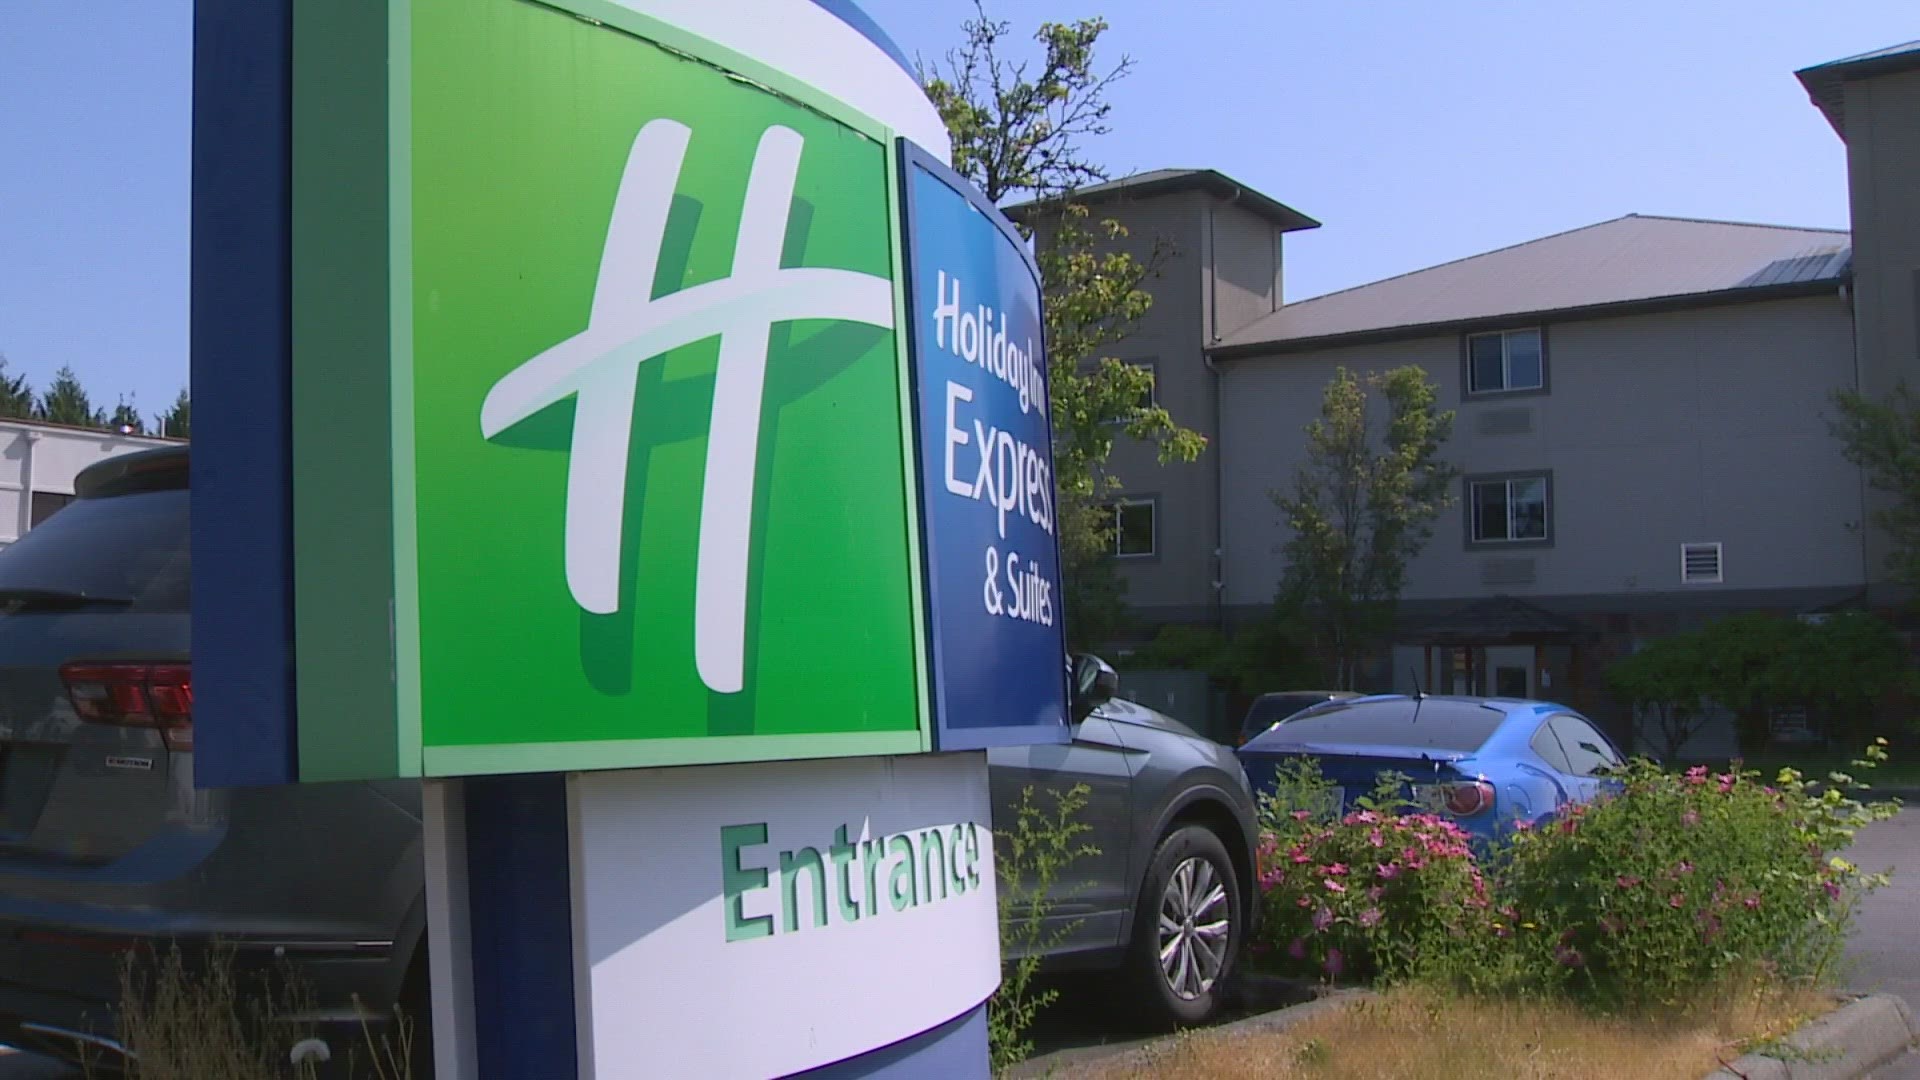 Authorities are investigating after twin infants were exposed to fentanyl in an Everett hotel room.